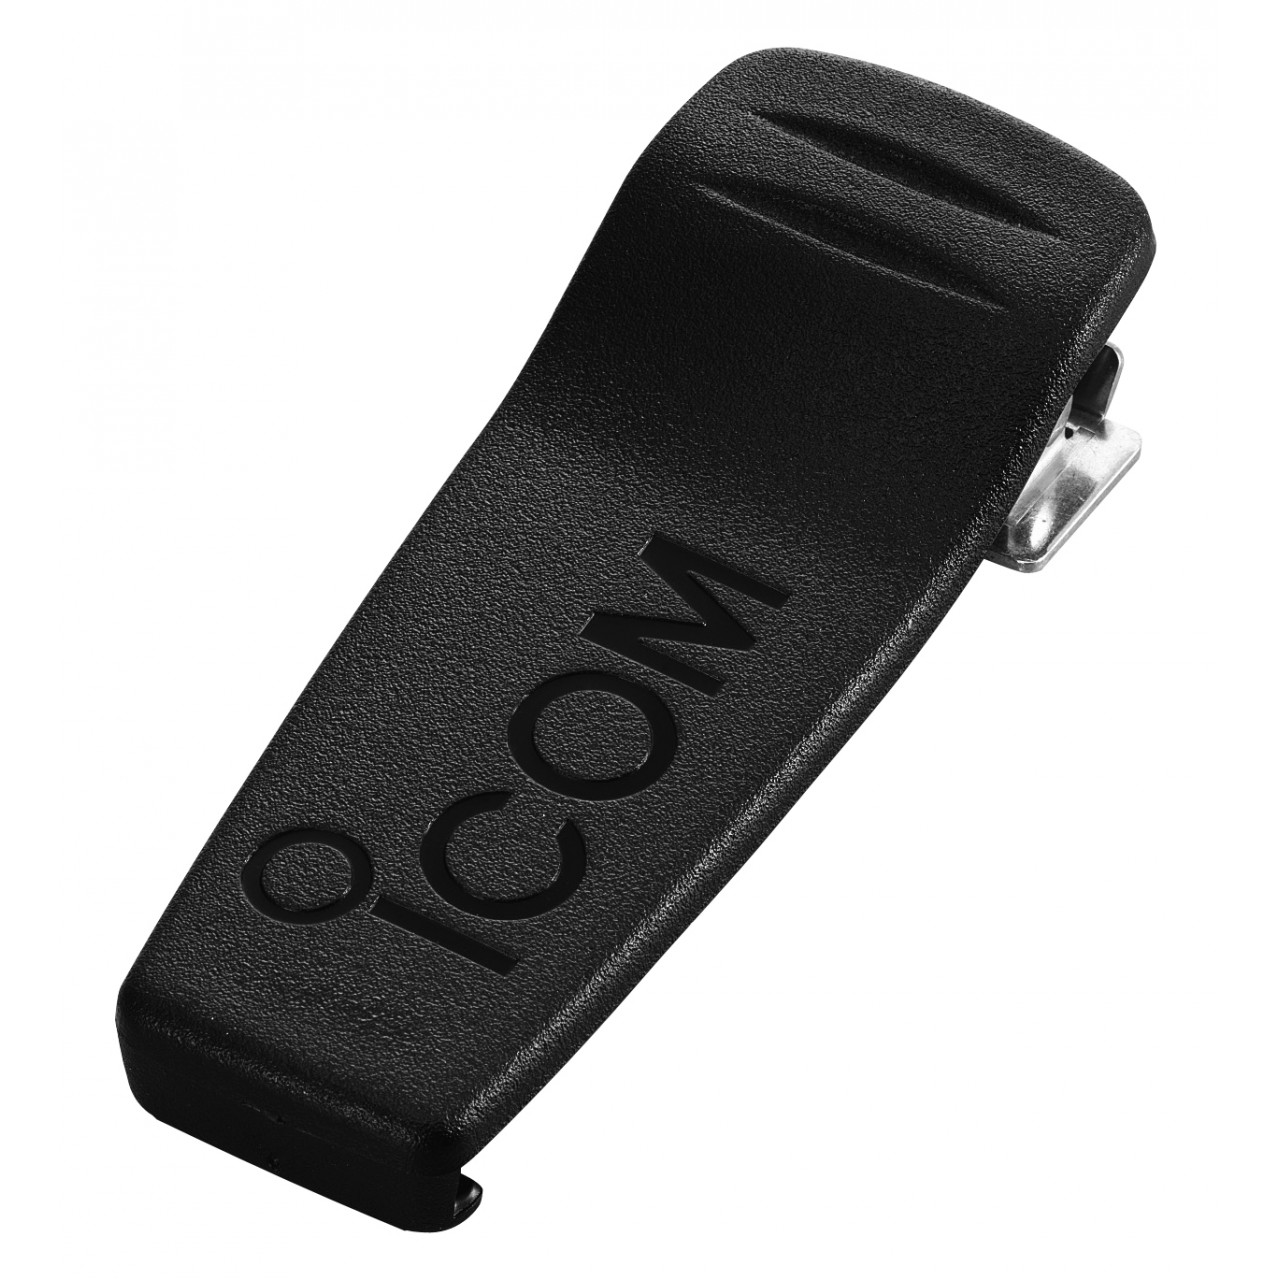 MB-109 Covers, fasteners and cradles - ICOM